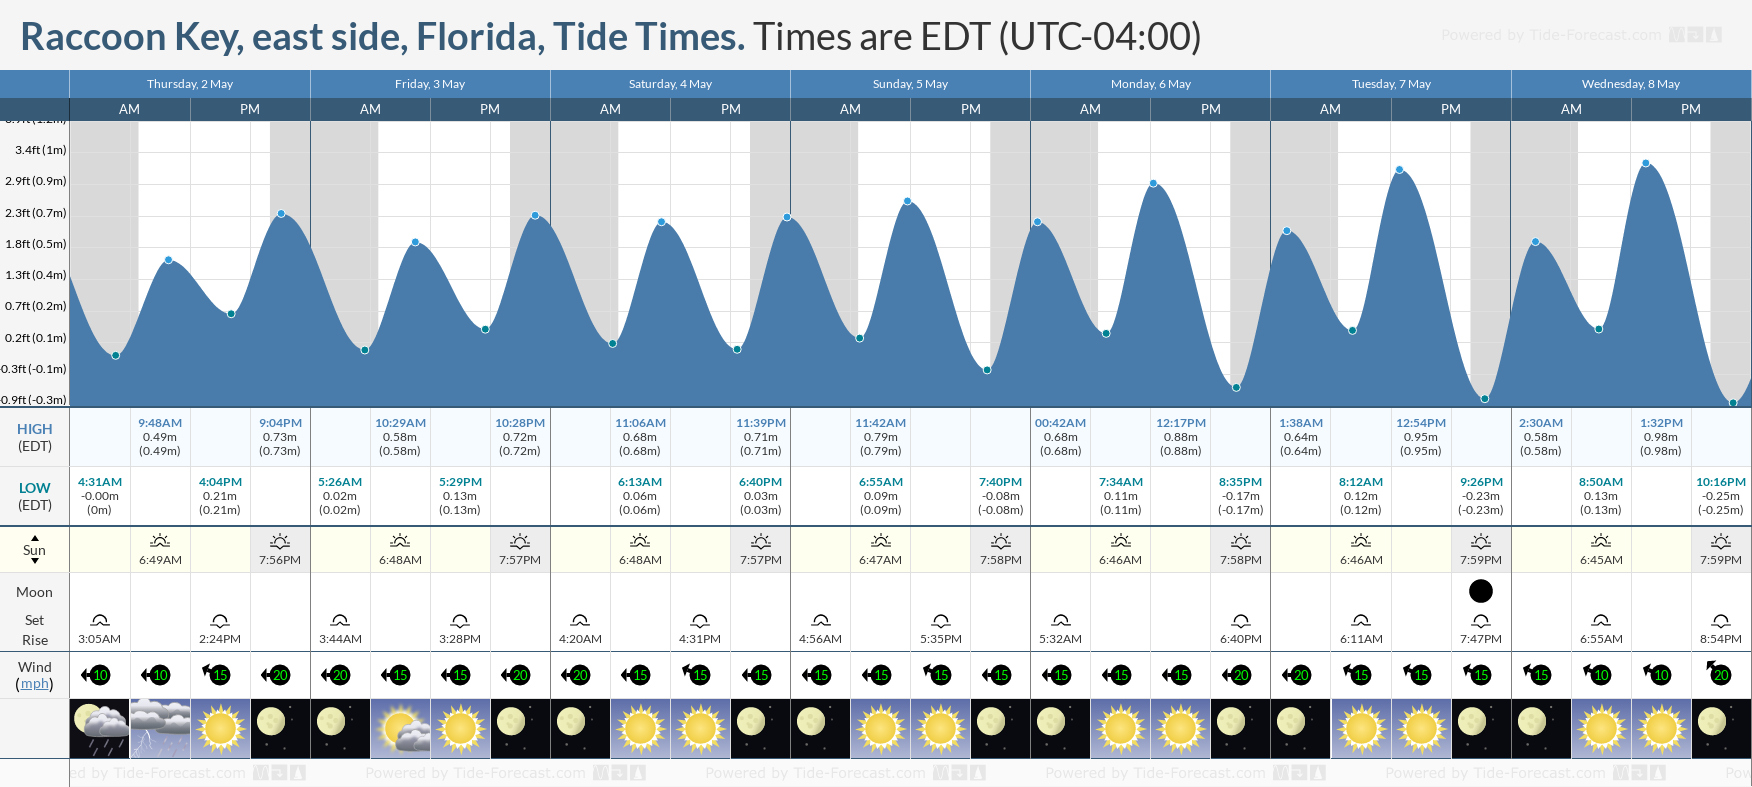 Raccoon Key, east side, Florida Tide Chart including high and low tide tide times for the next 7 days